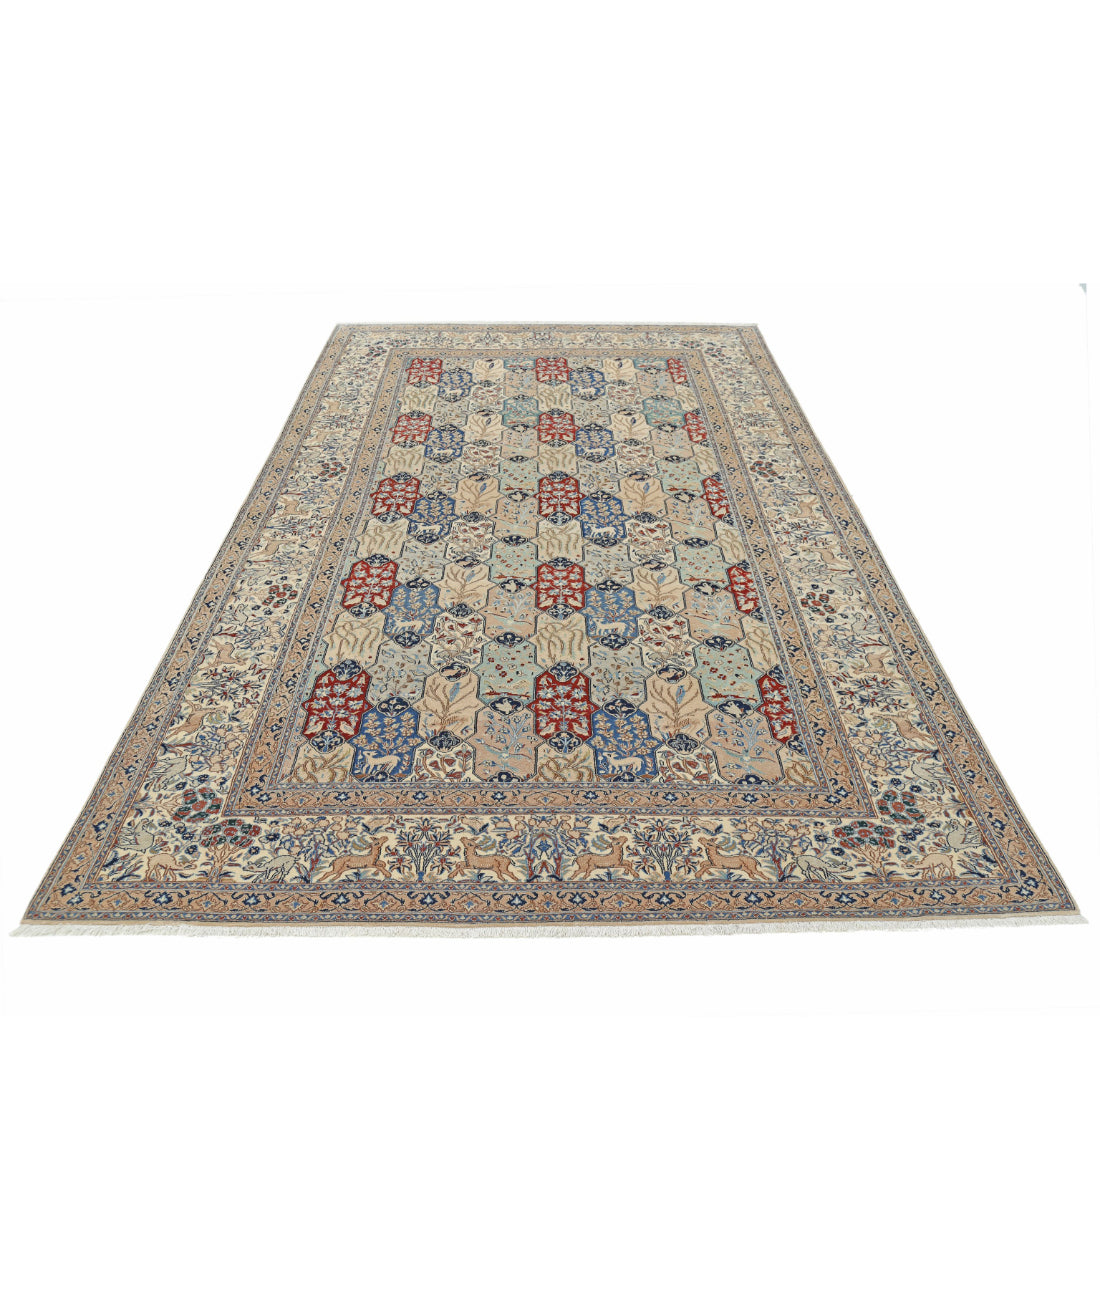 Hand Knotted Masterpiece Persian Nain Wool & Silk Rug - 5'11'' x 9'7'' 5'11'' x 9'7'' (178 X 288) / Ivory / Taupe